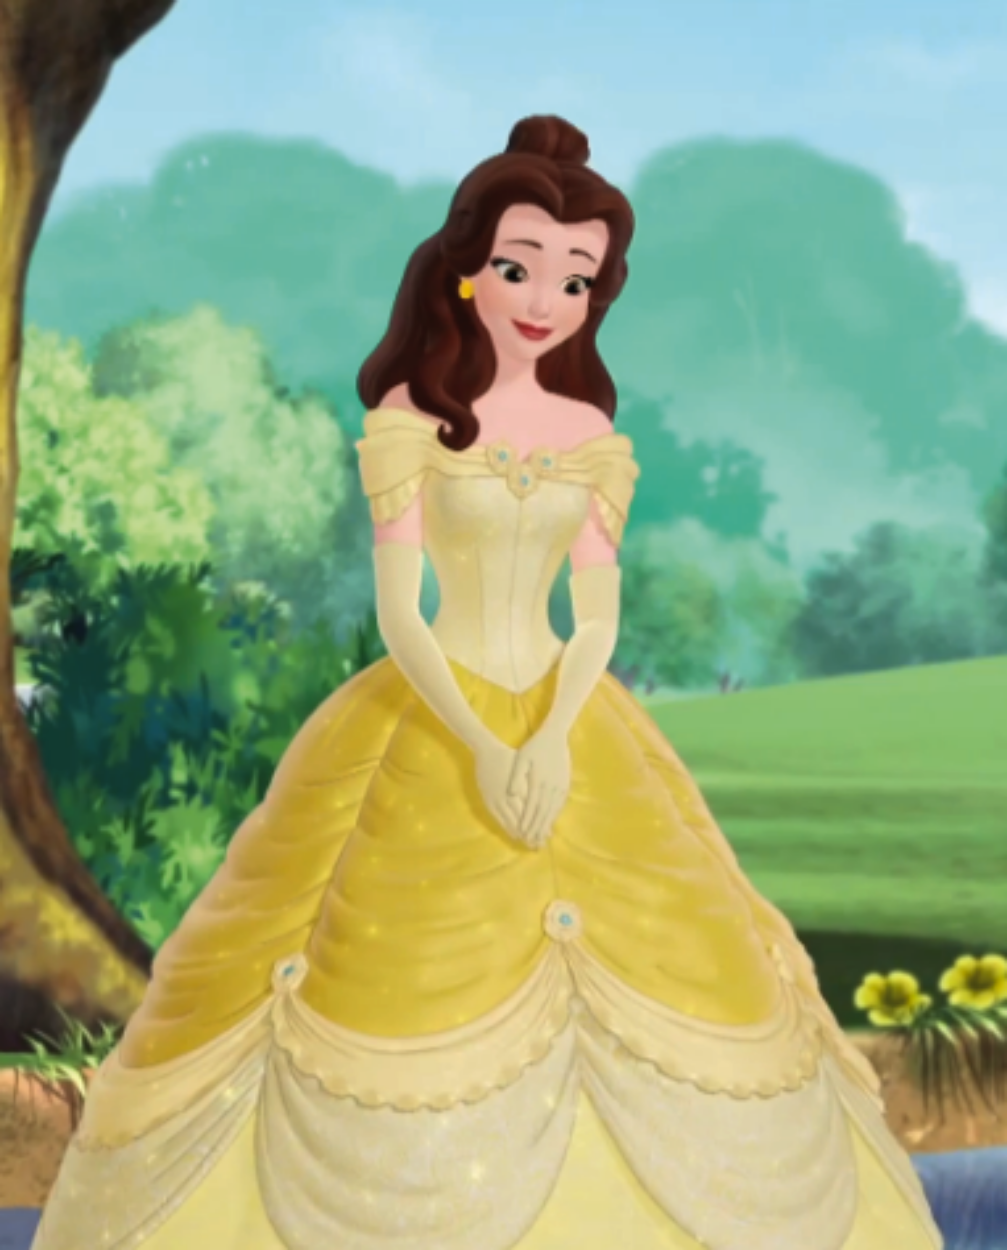 Belle (Beauty and the Beast) - Wikipedia